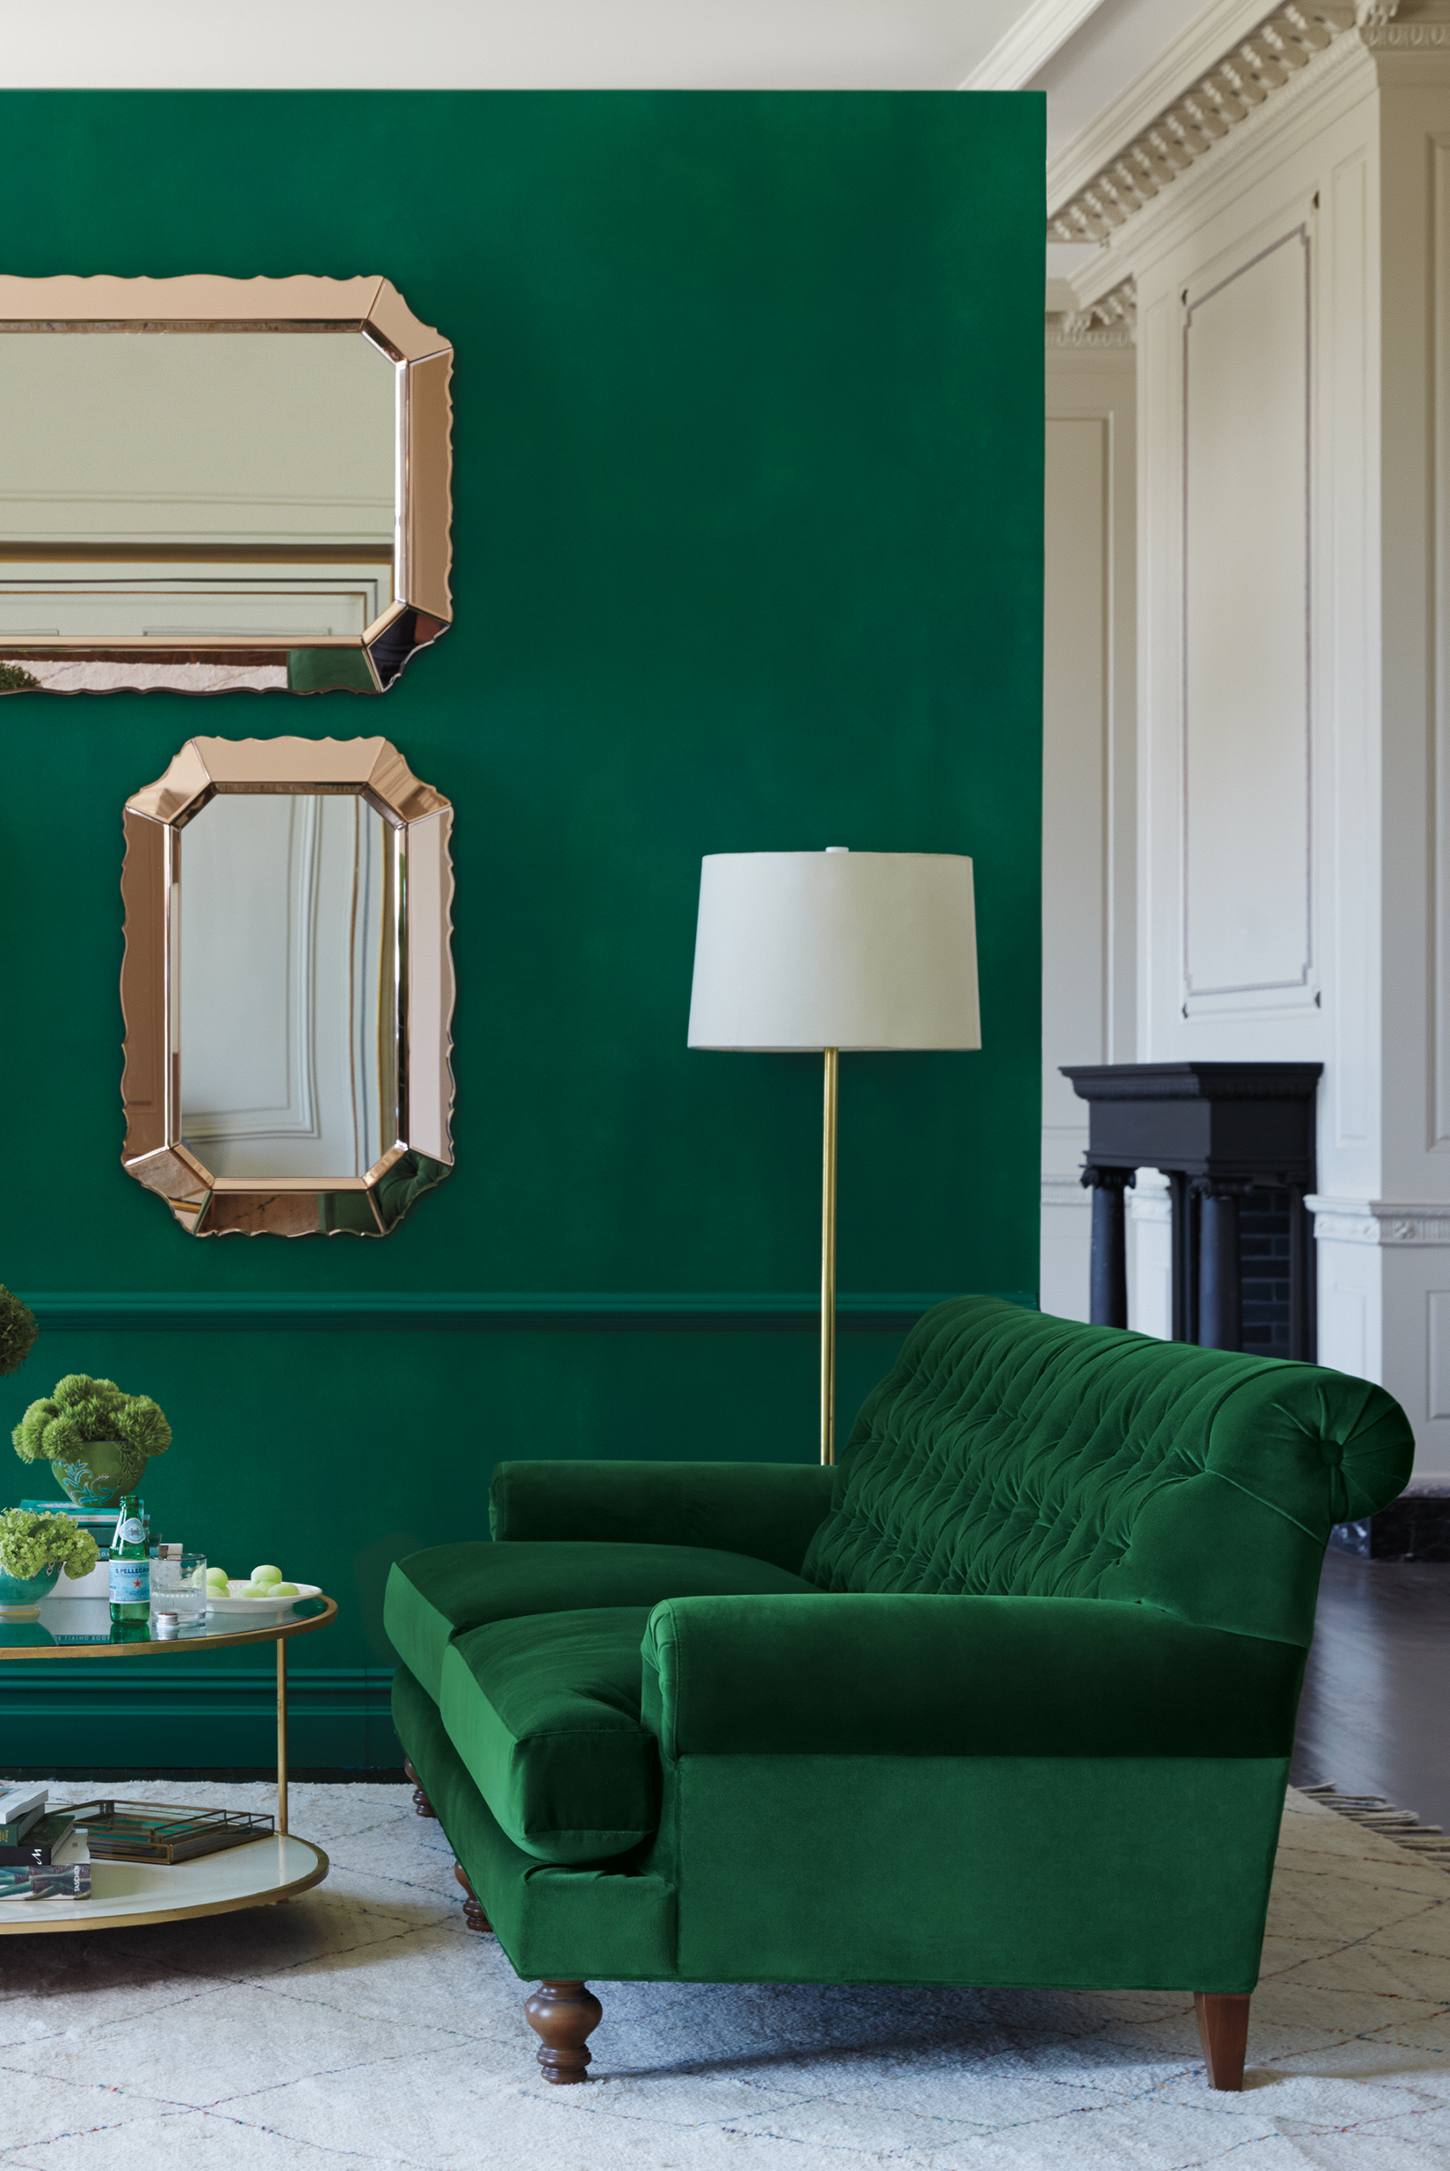 jewel tone interiors implement trend right way source